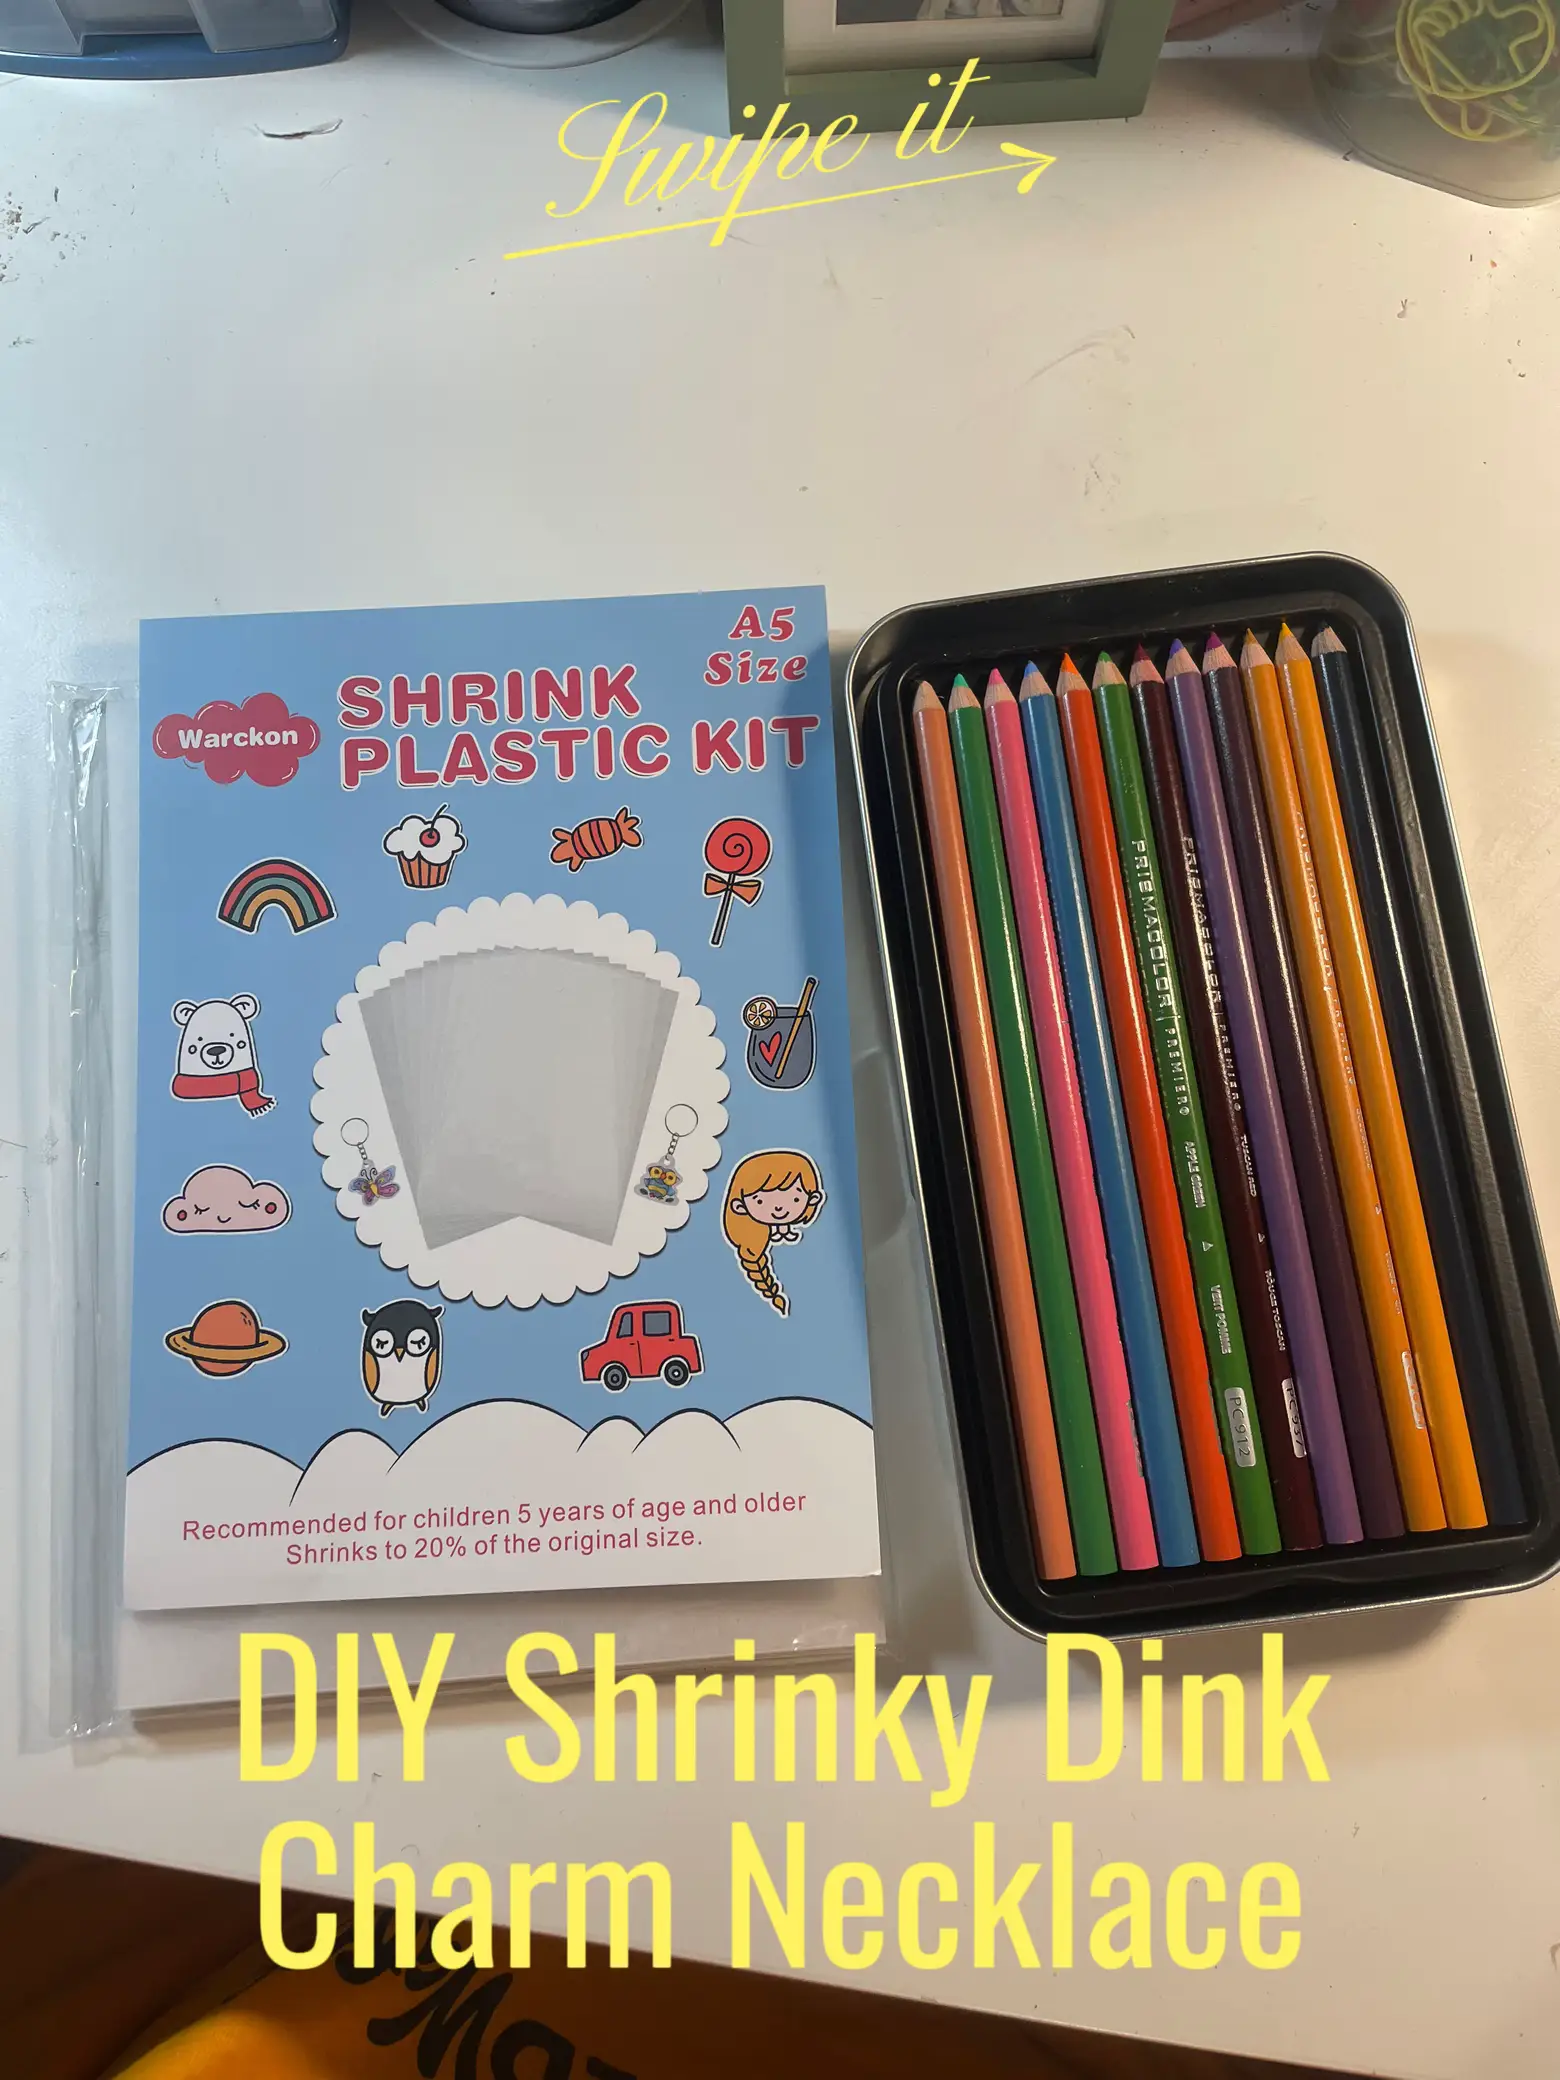 DIY Shrinky Dink Charm Necklace, Gallery posted by marni